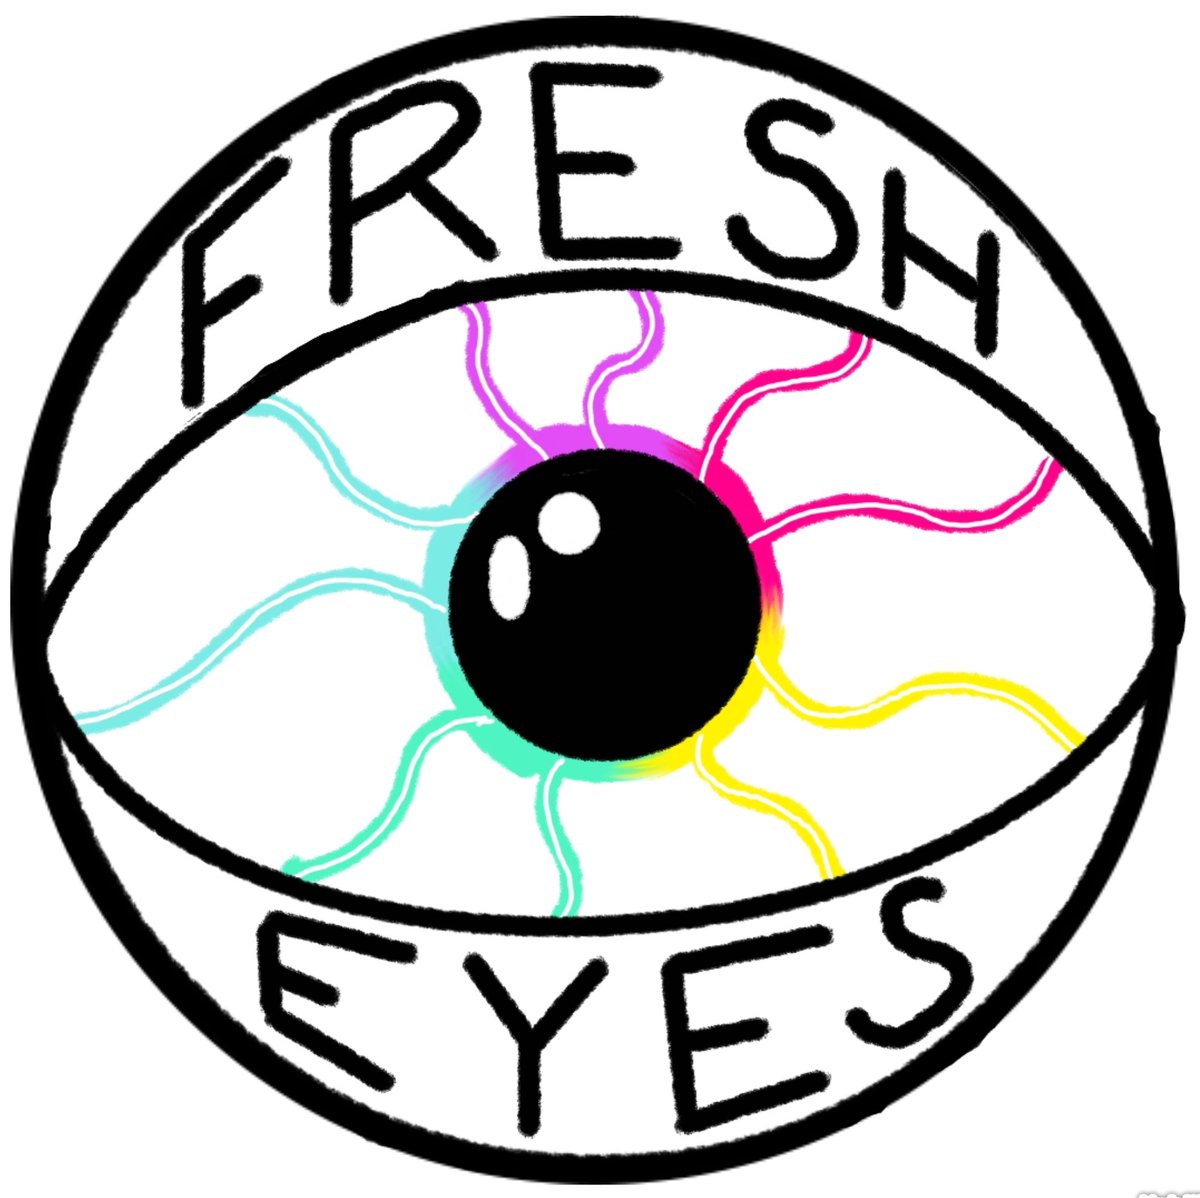 Well done to everyone at St Anne's Community College, Killaloe involved in organising the youth led Fresh Eyes Festival taking place on Thurs May 16th 🤩
Read the full inspiring story here: bit.ly/44zST7q
#etbschools #TalentedStudents #InspiringTeachers #FindTheBestInYou